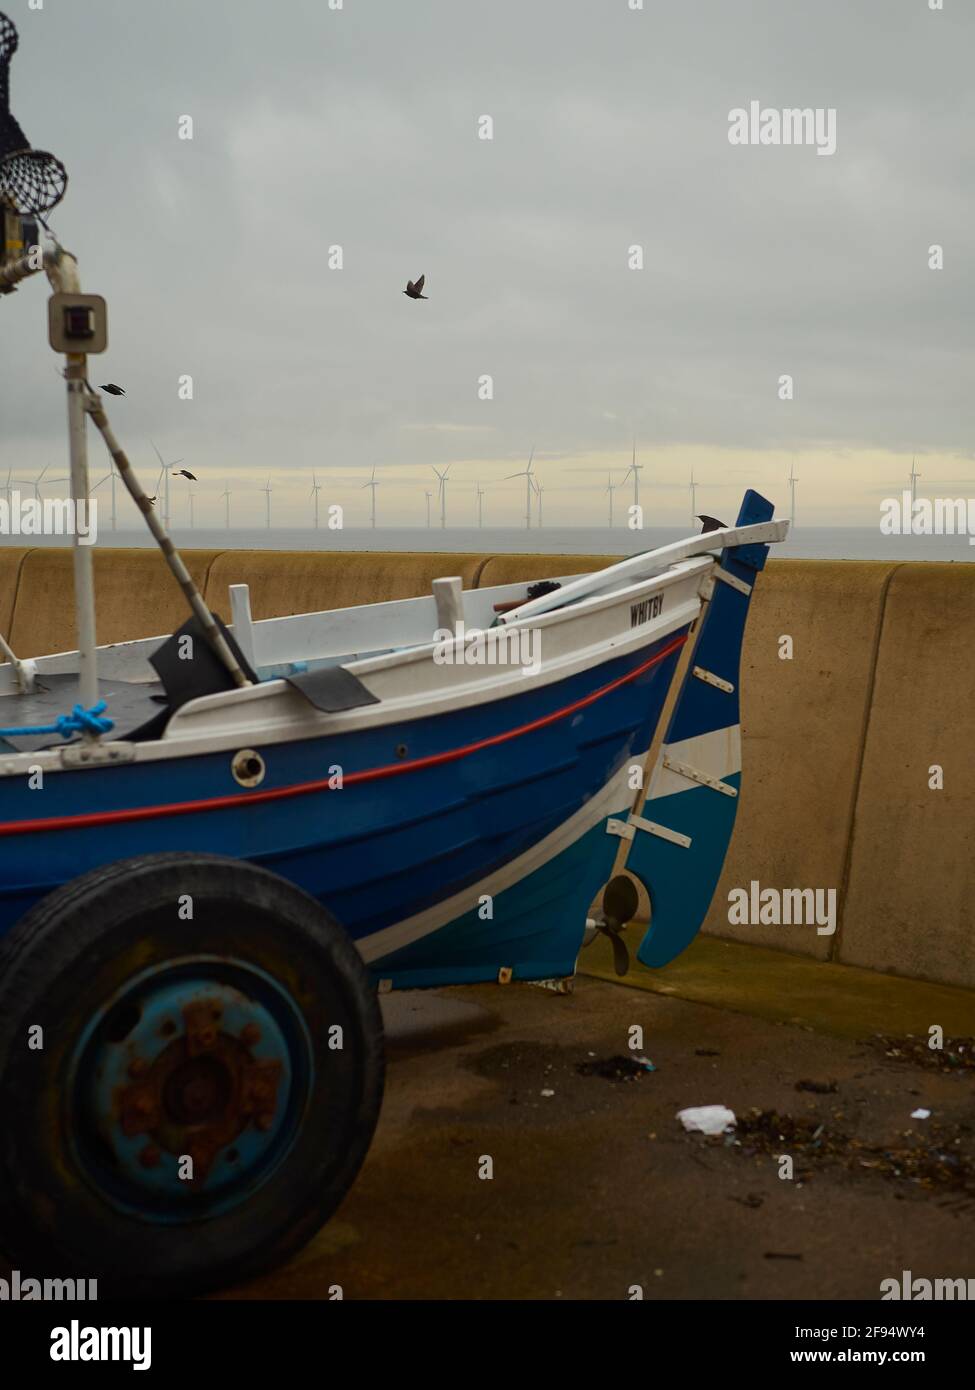 Redcar UK, Dec 2018 - Old and new, a traditional Yorkshire Cobble fishing boat with a modern wind farm on the horizon. A bird on the breeze gives life Stock Photo